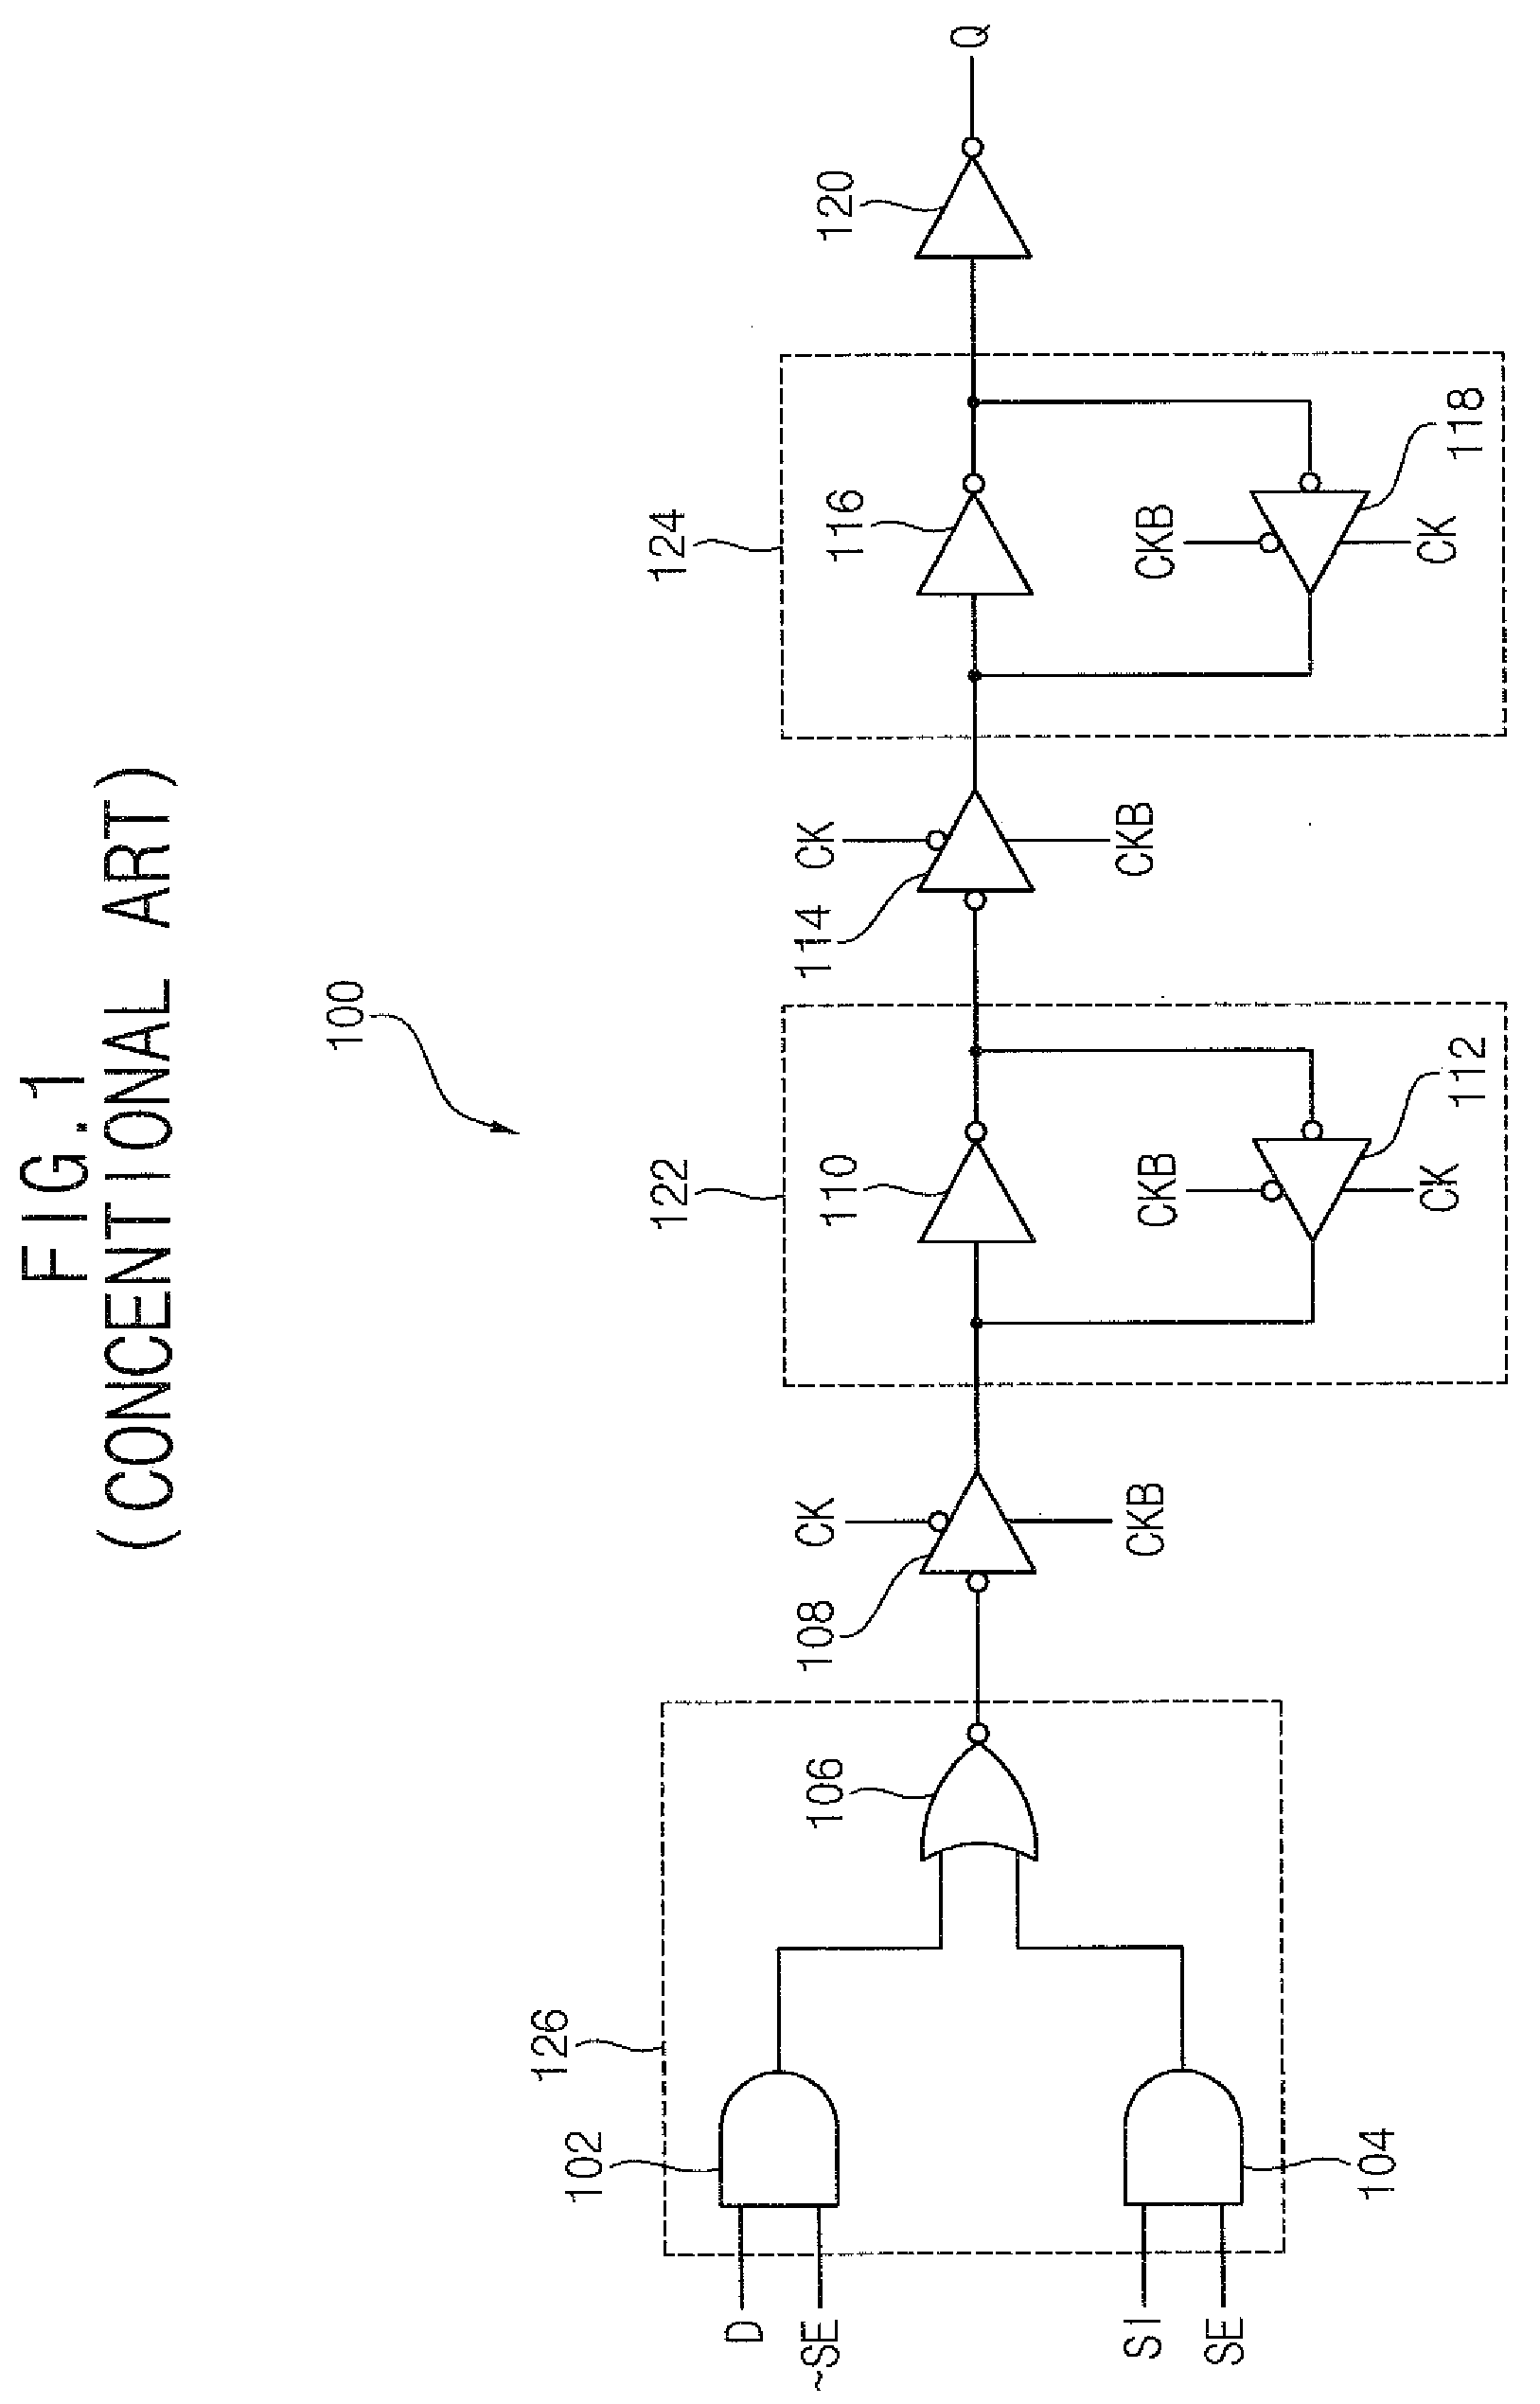 Pulse operated flip-flop circuit having test-input function and associated method